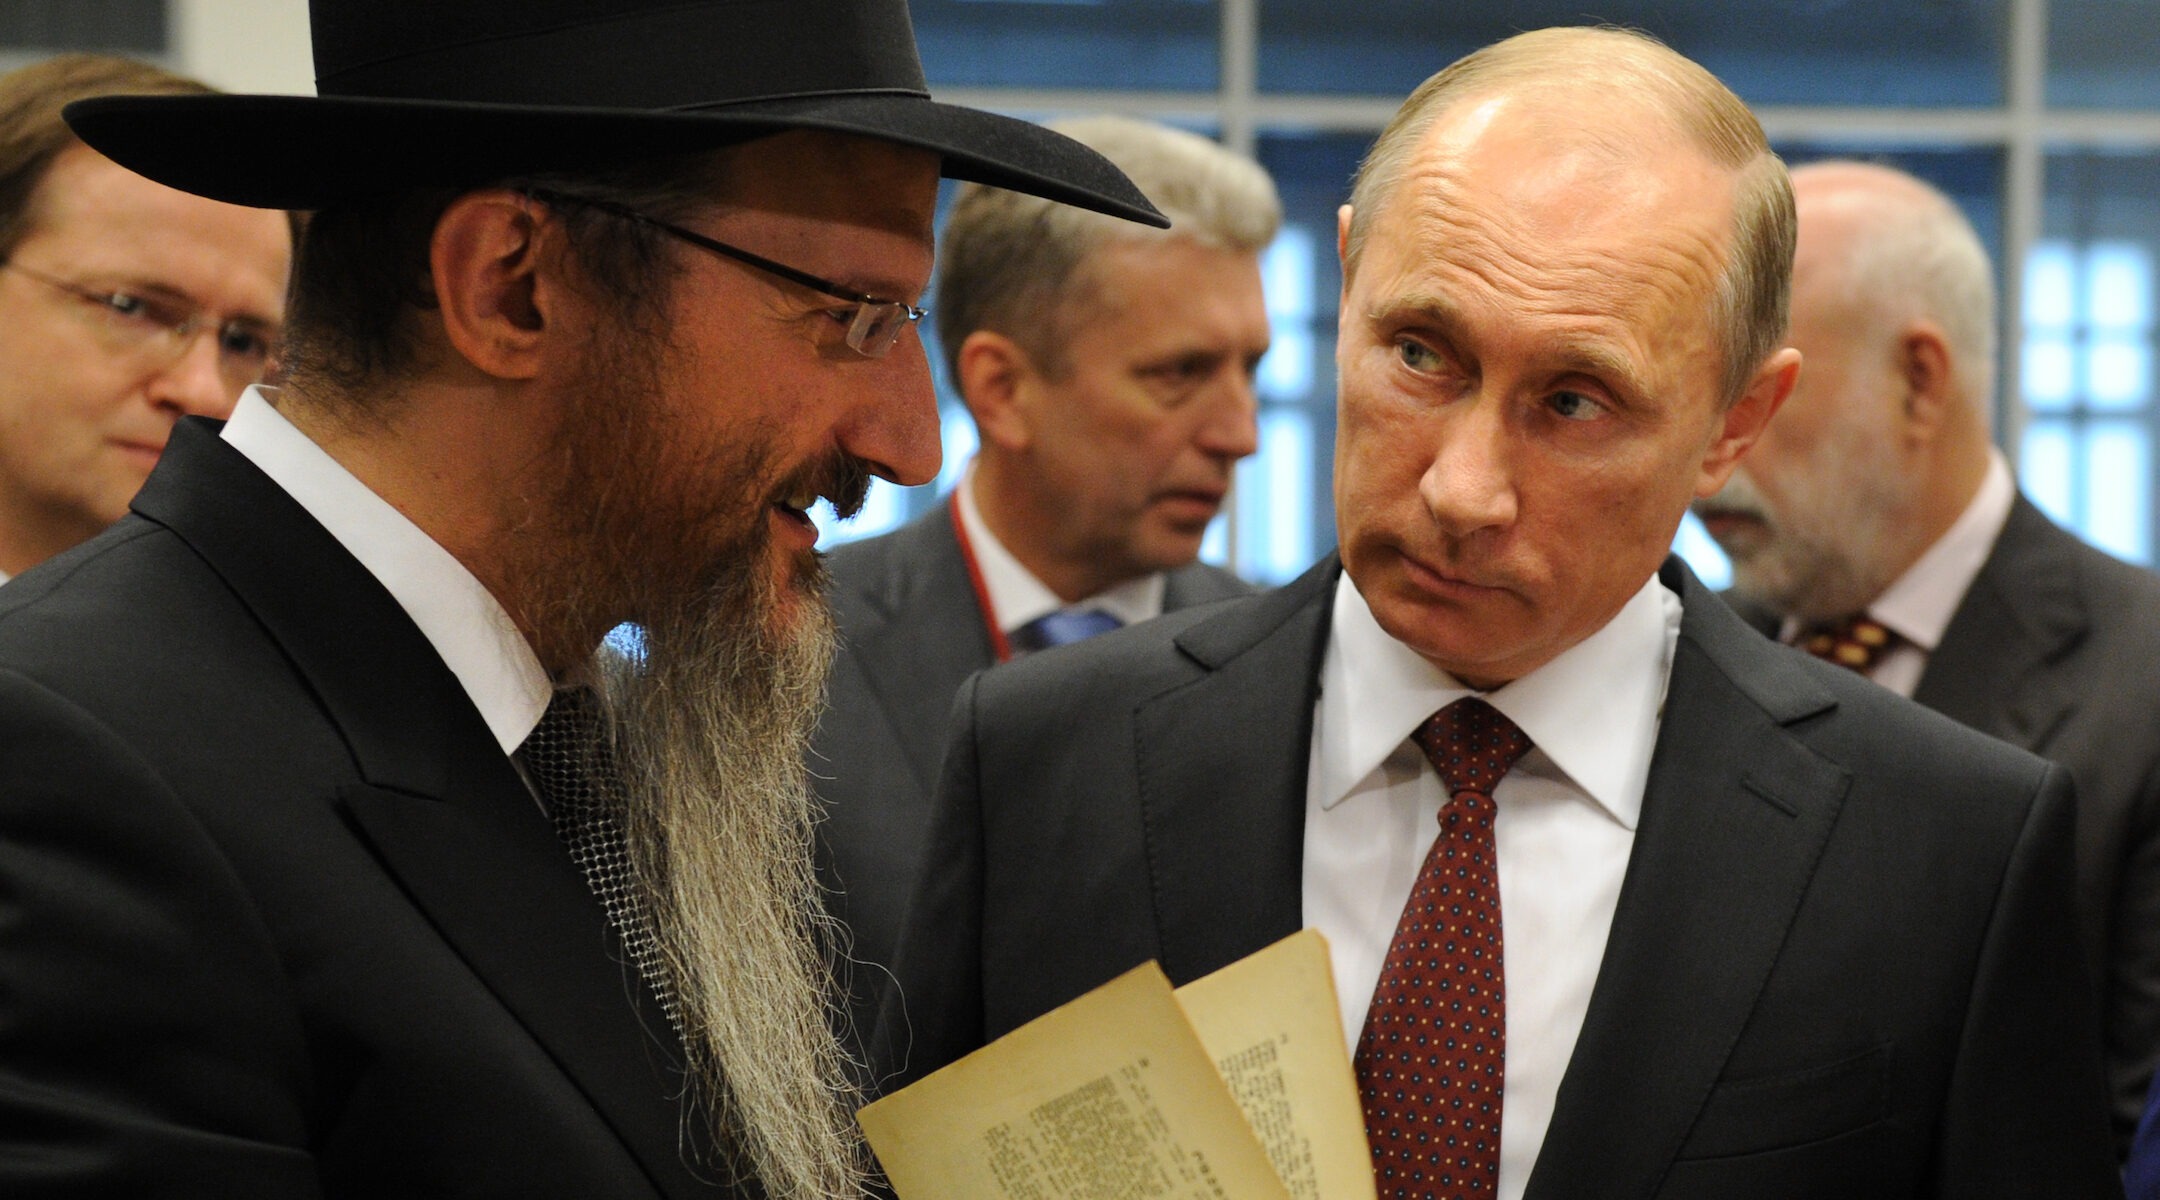 Russia's President Vladimir Putin (right) and Russia's Chief Rabbi Berel Lazar attend a ceremony marking the handover of items in the Schneerson library to a Chabad-run museum in Moscow, June 13, 2013. (Photo/JTA-Yuri Kadobnov-AFP via Getty Images)